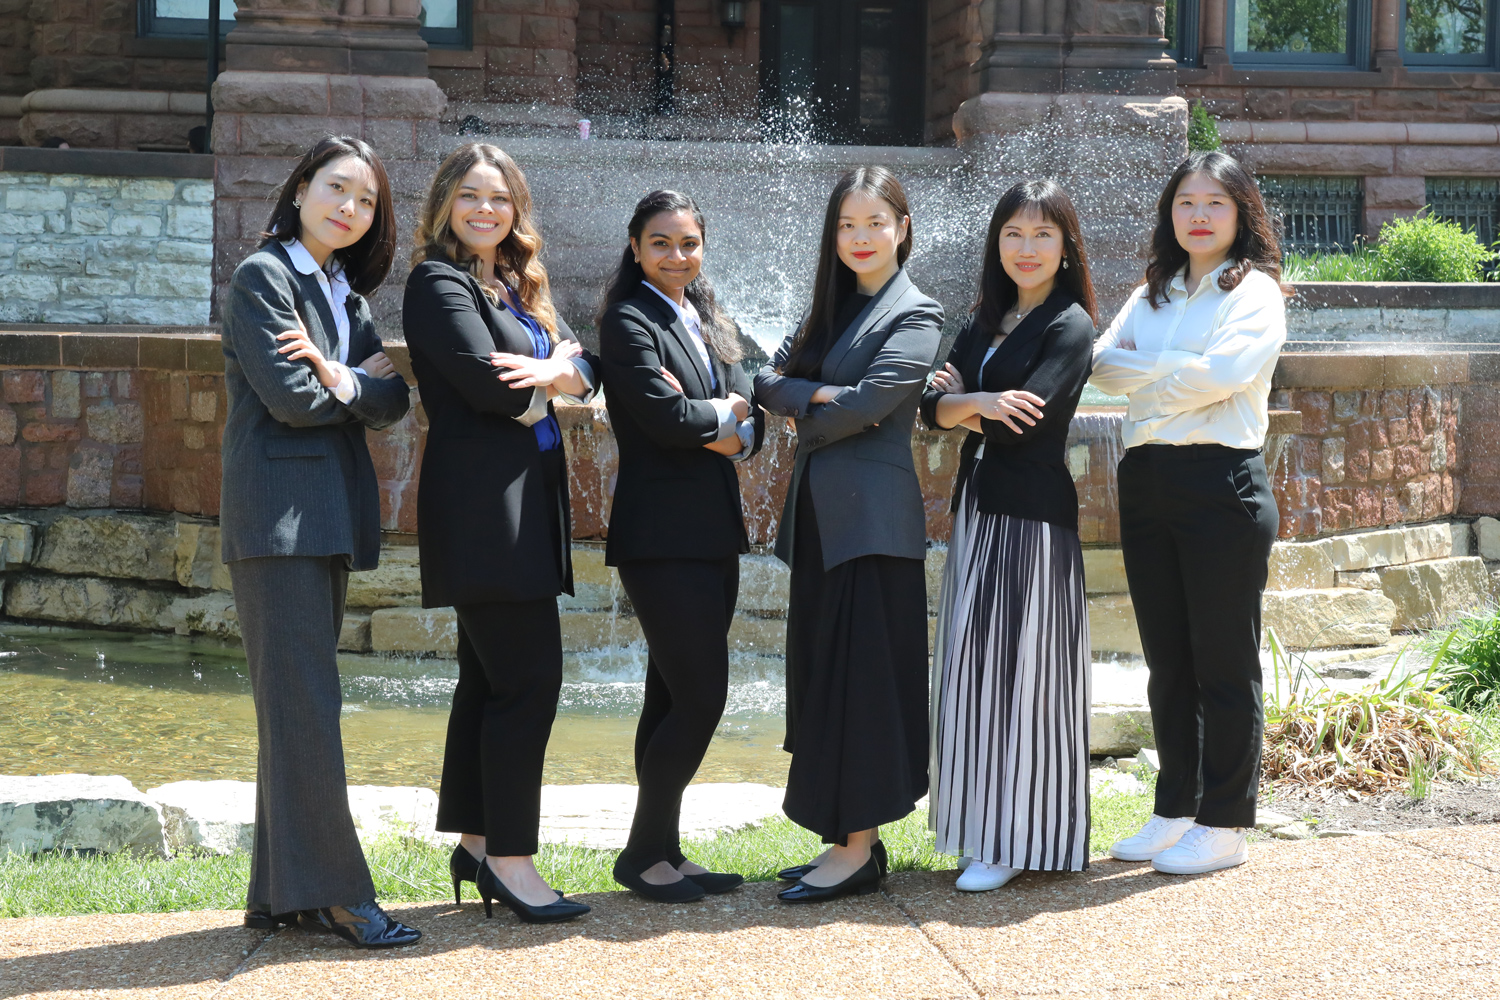 2024-25 Chaifetz School of Business PhD Students pose in front of a fountain while wearing business attire.